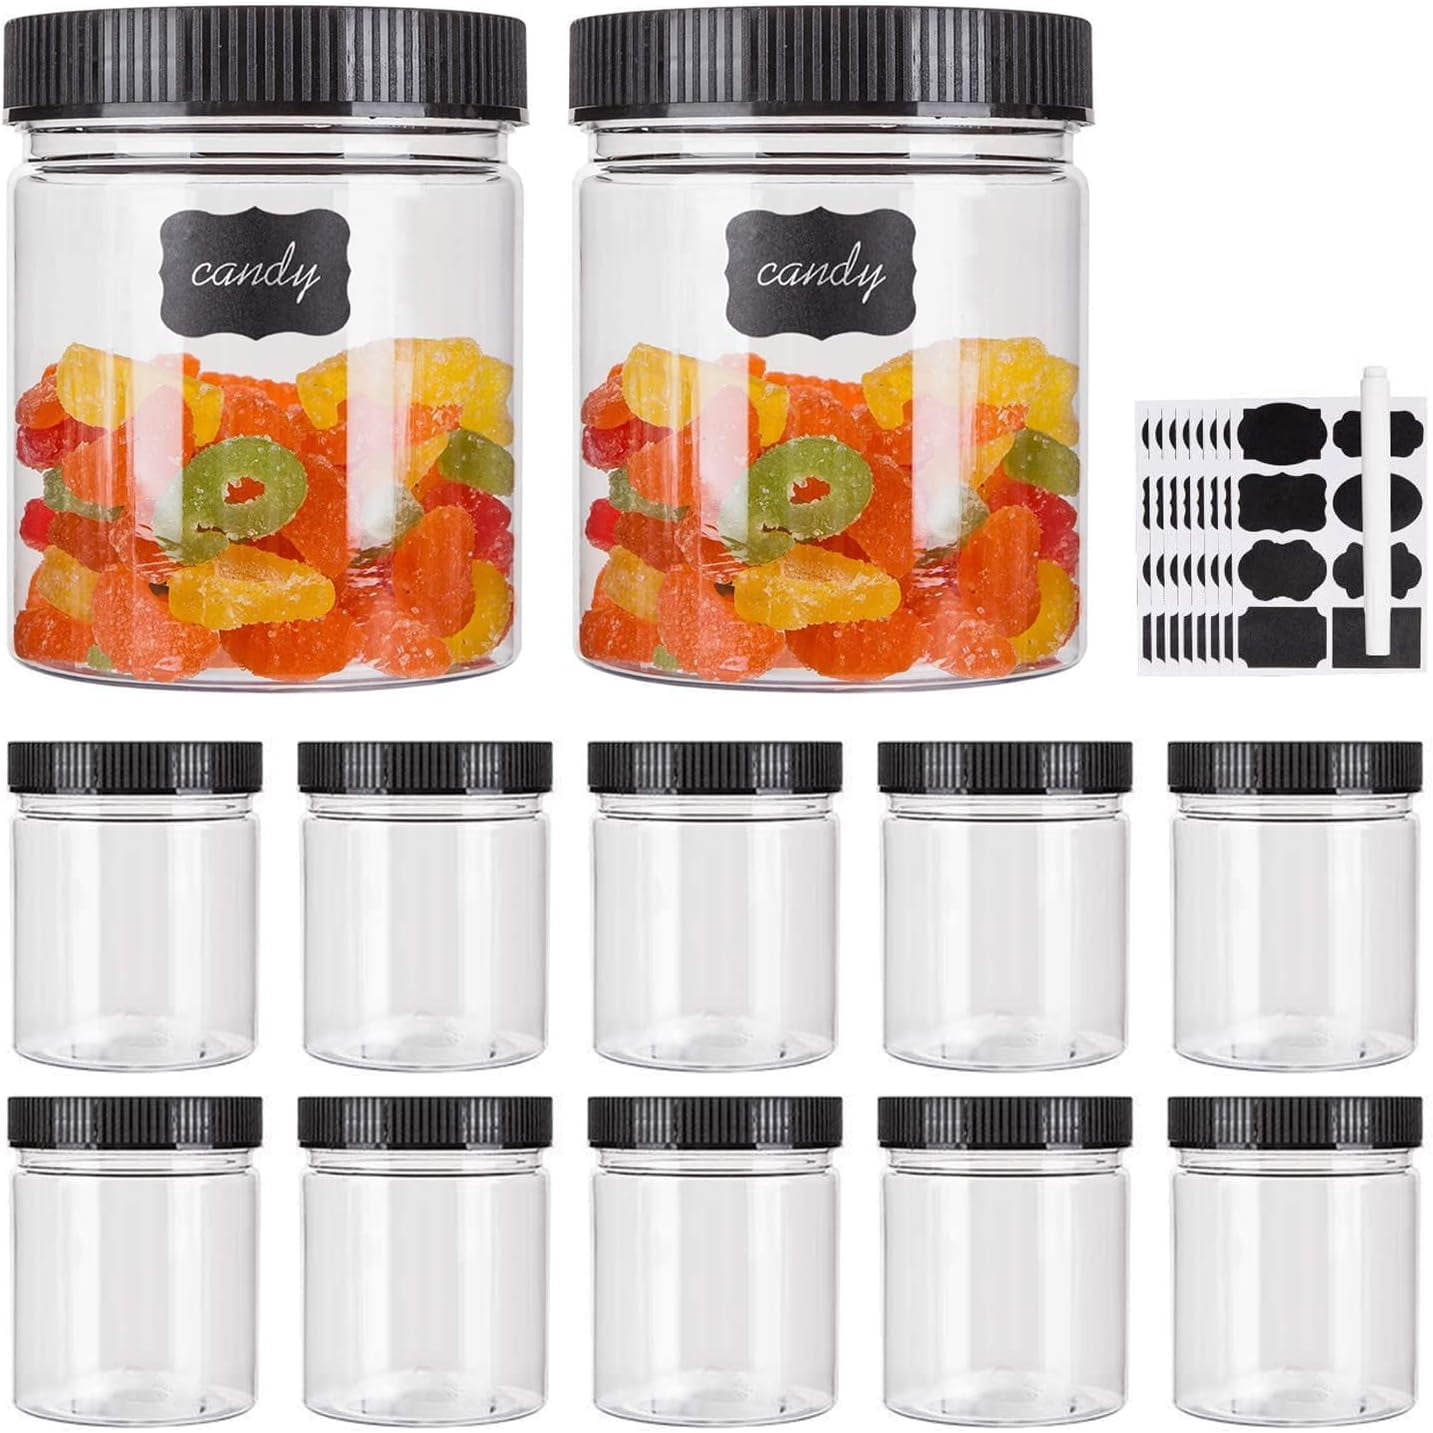 Yephets 16 oz Plastic Jars with Lids, 12 Pack Clear Plastic Slime Containers for Kitchen and Household Food Storage of Dry Goods, Creams and More